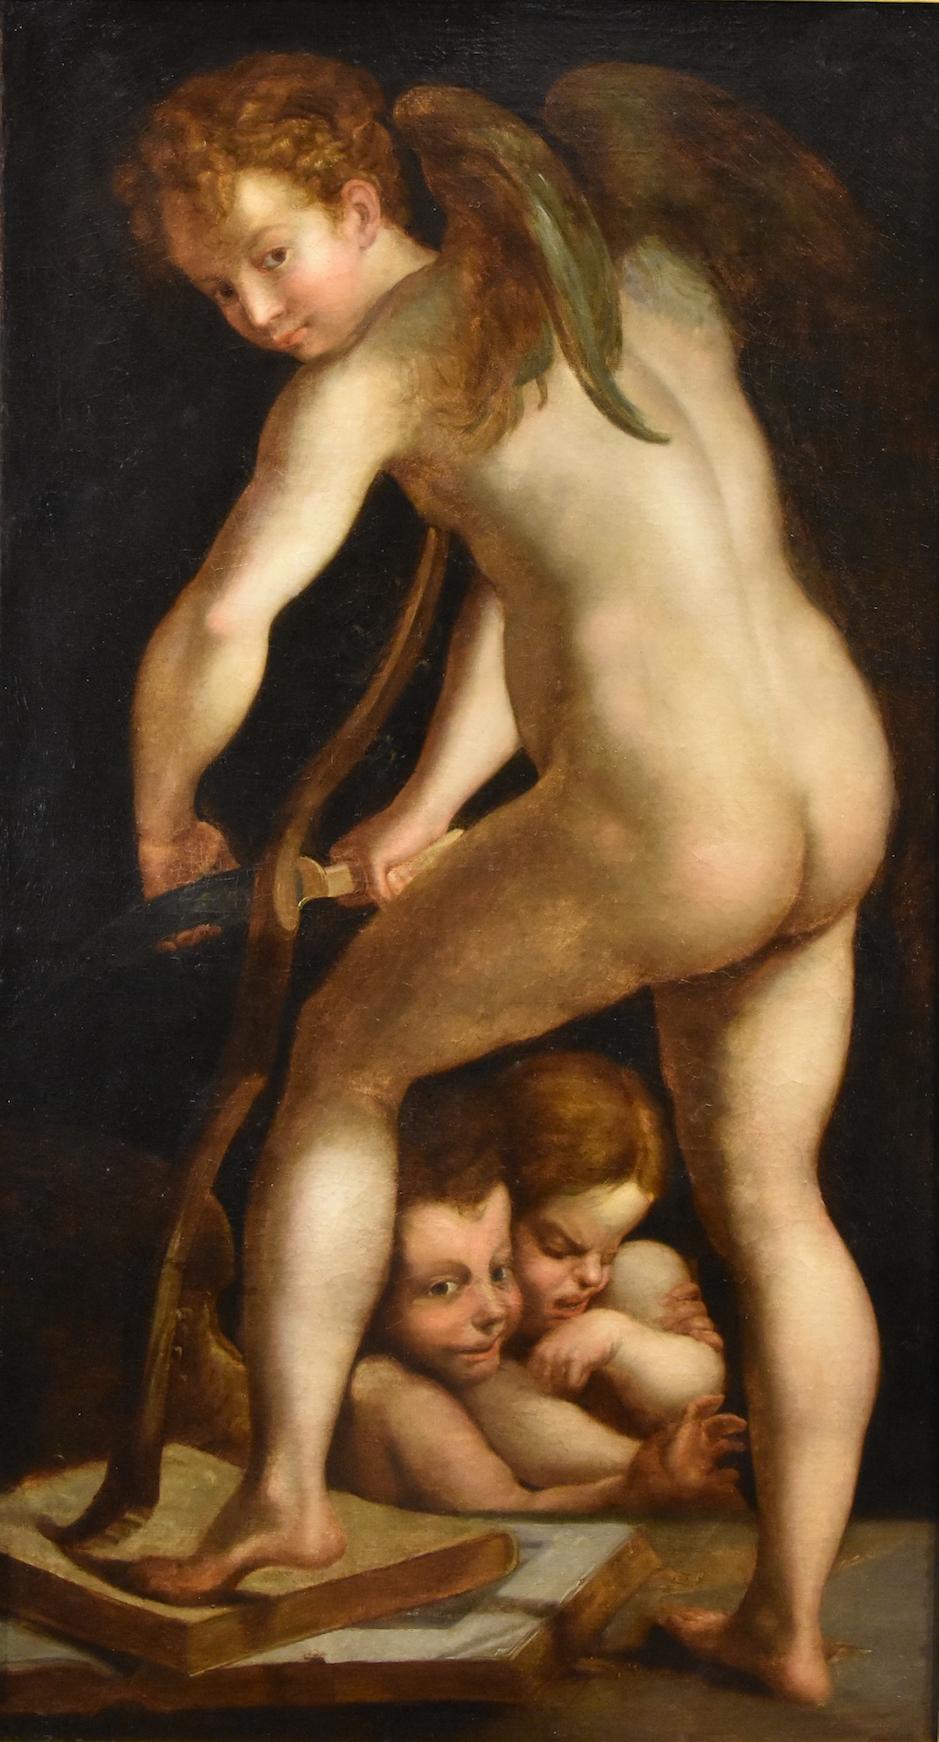 Cupid Portrait Parmigianino Paint 17/18th Century Oil on canvas Old master Italy - Painting by Francesco Mazzola, Known As Il Parmigianino (parme, 1503 - 1540) 